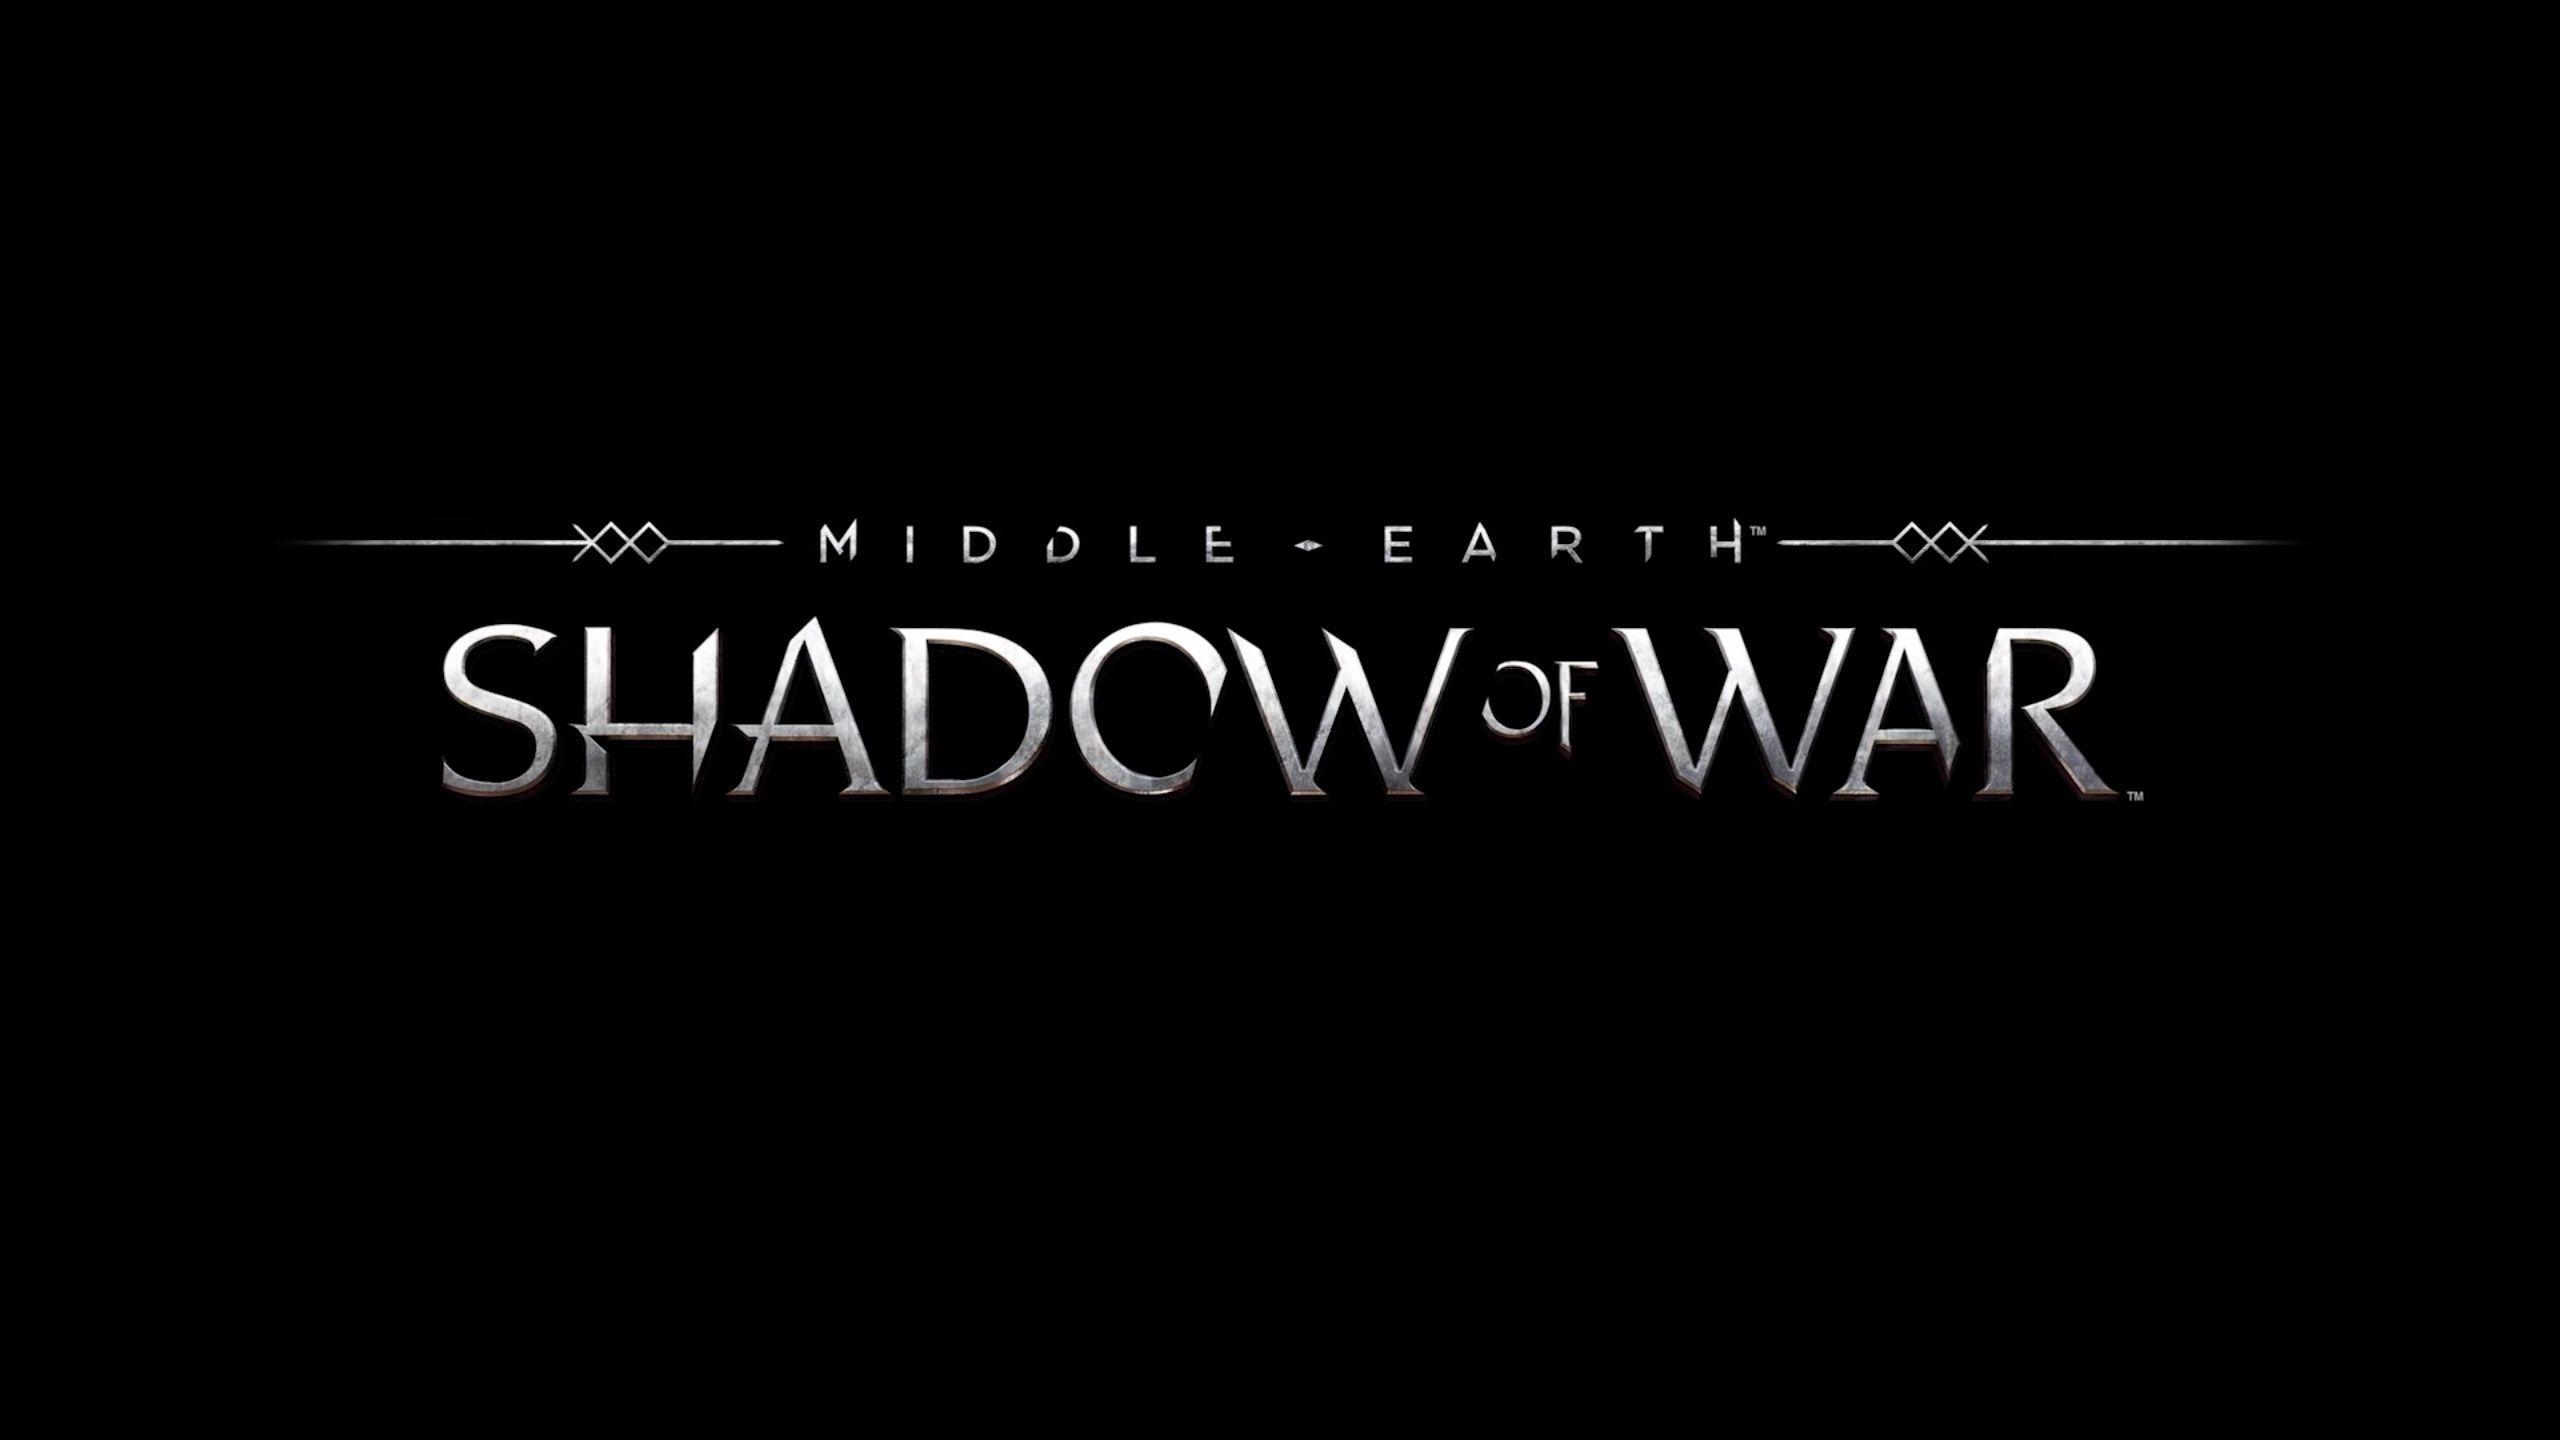 wallpaper free middle earth shadow of war Download